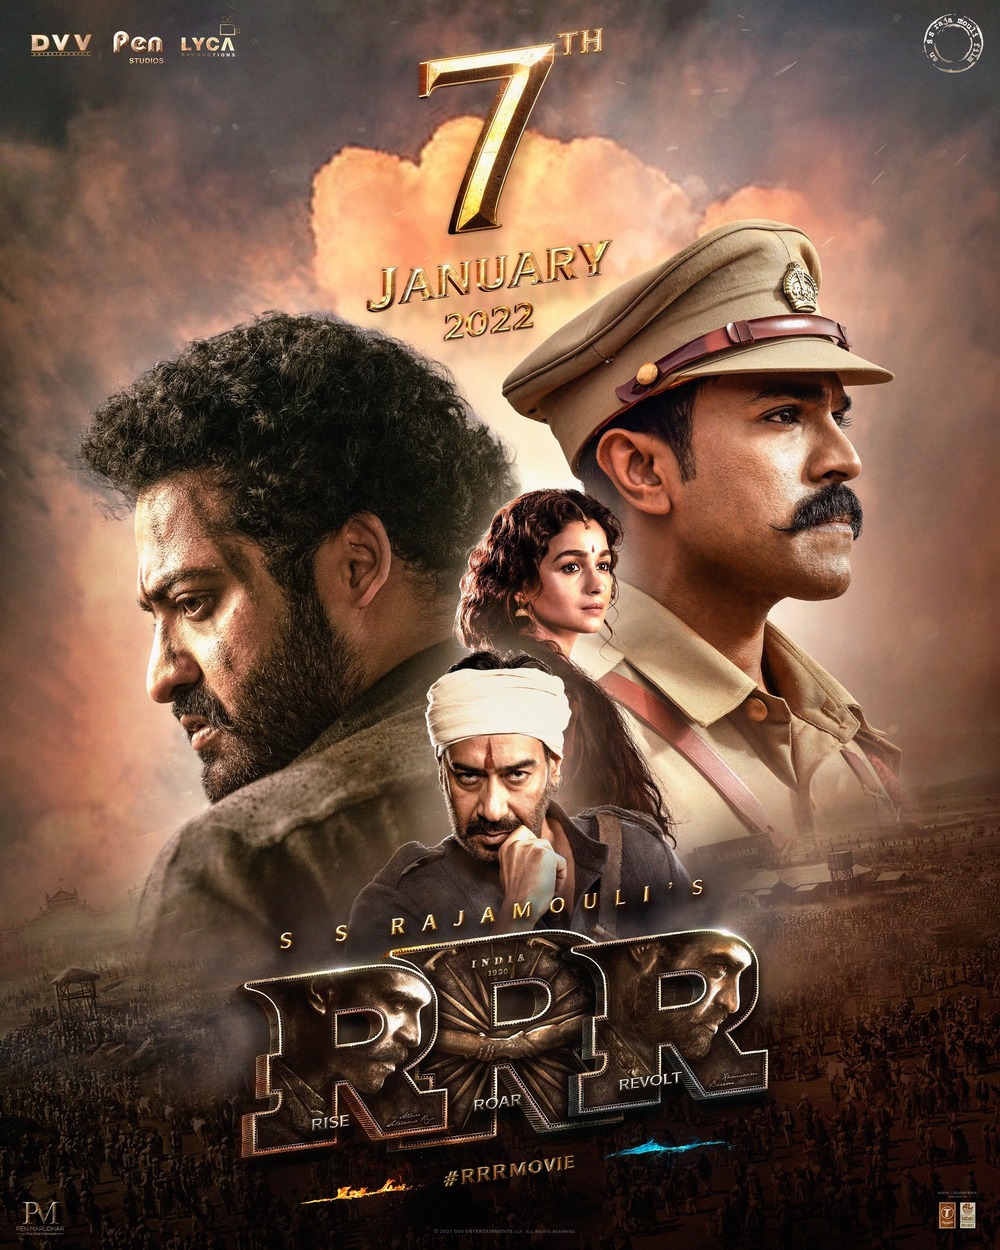 rrr movie review by foreigners